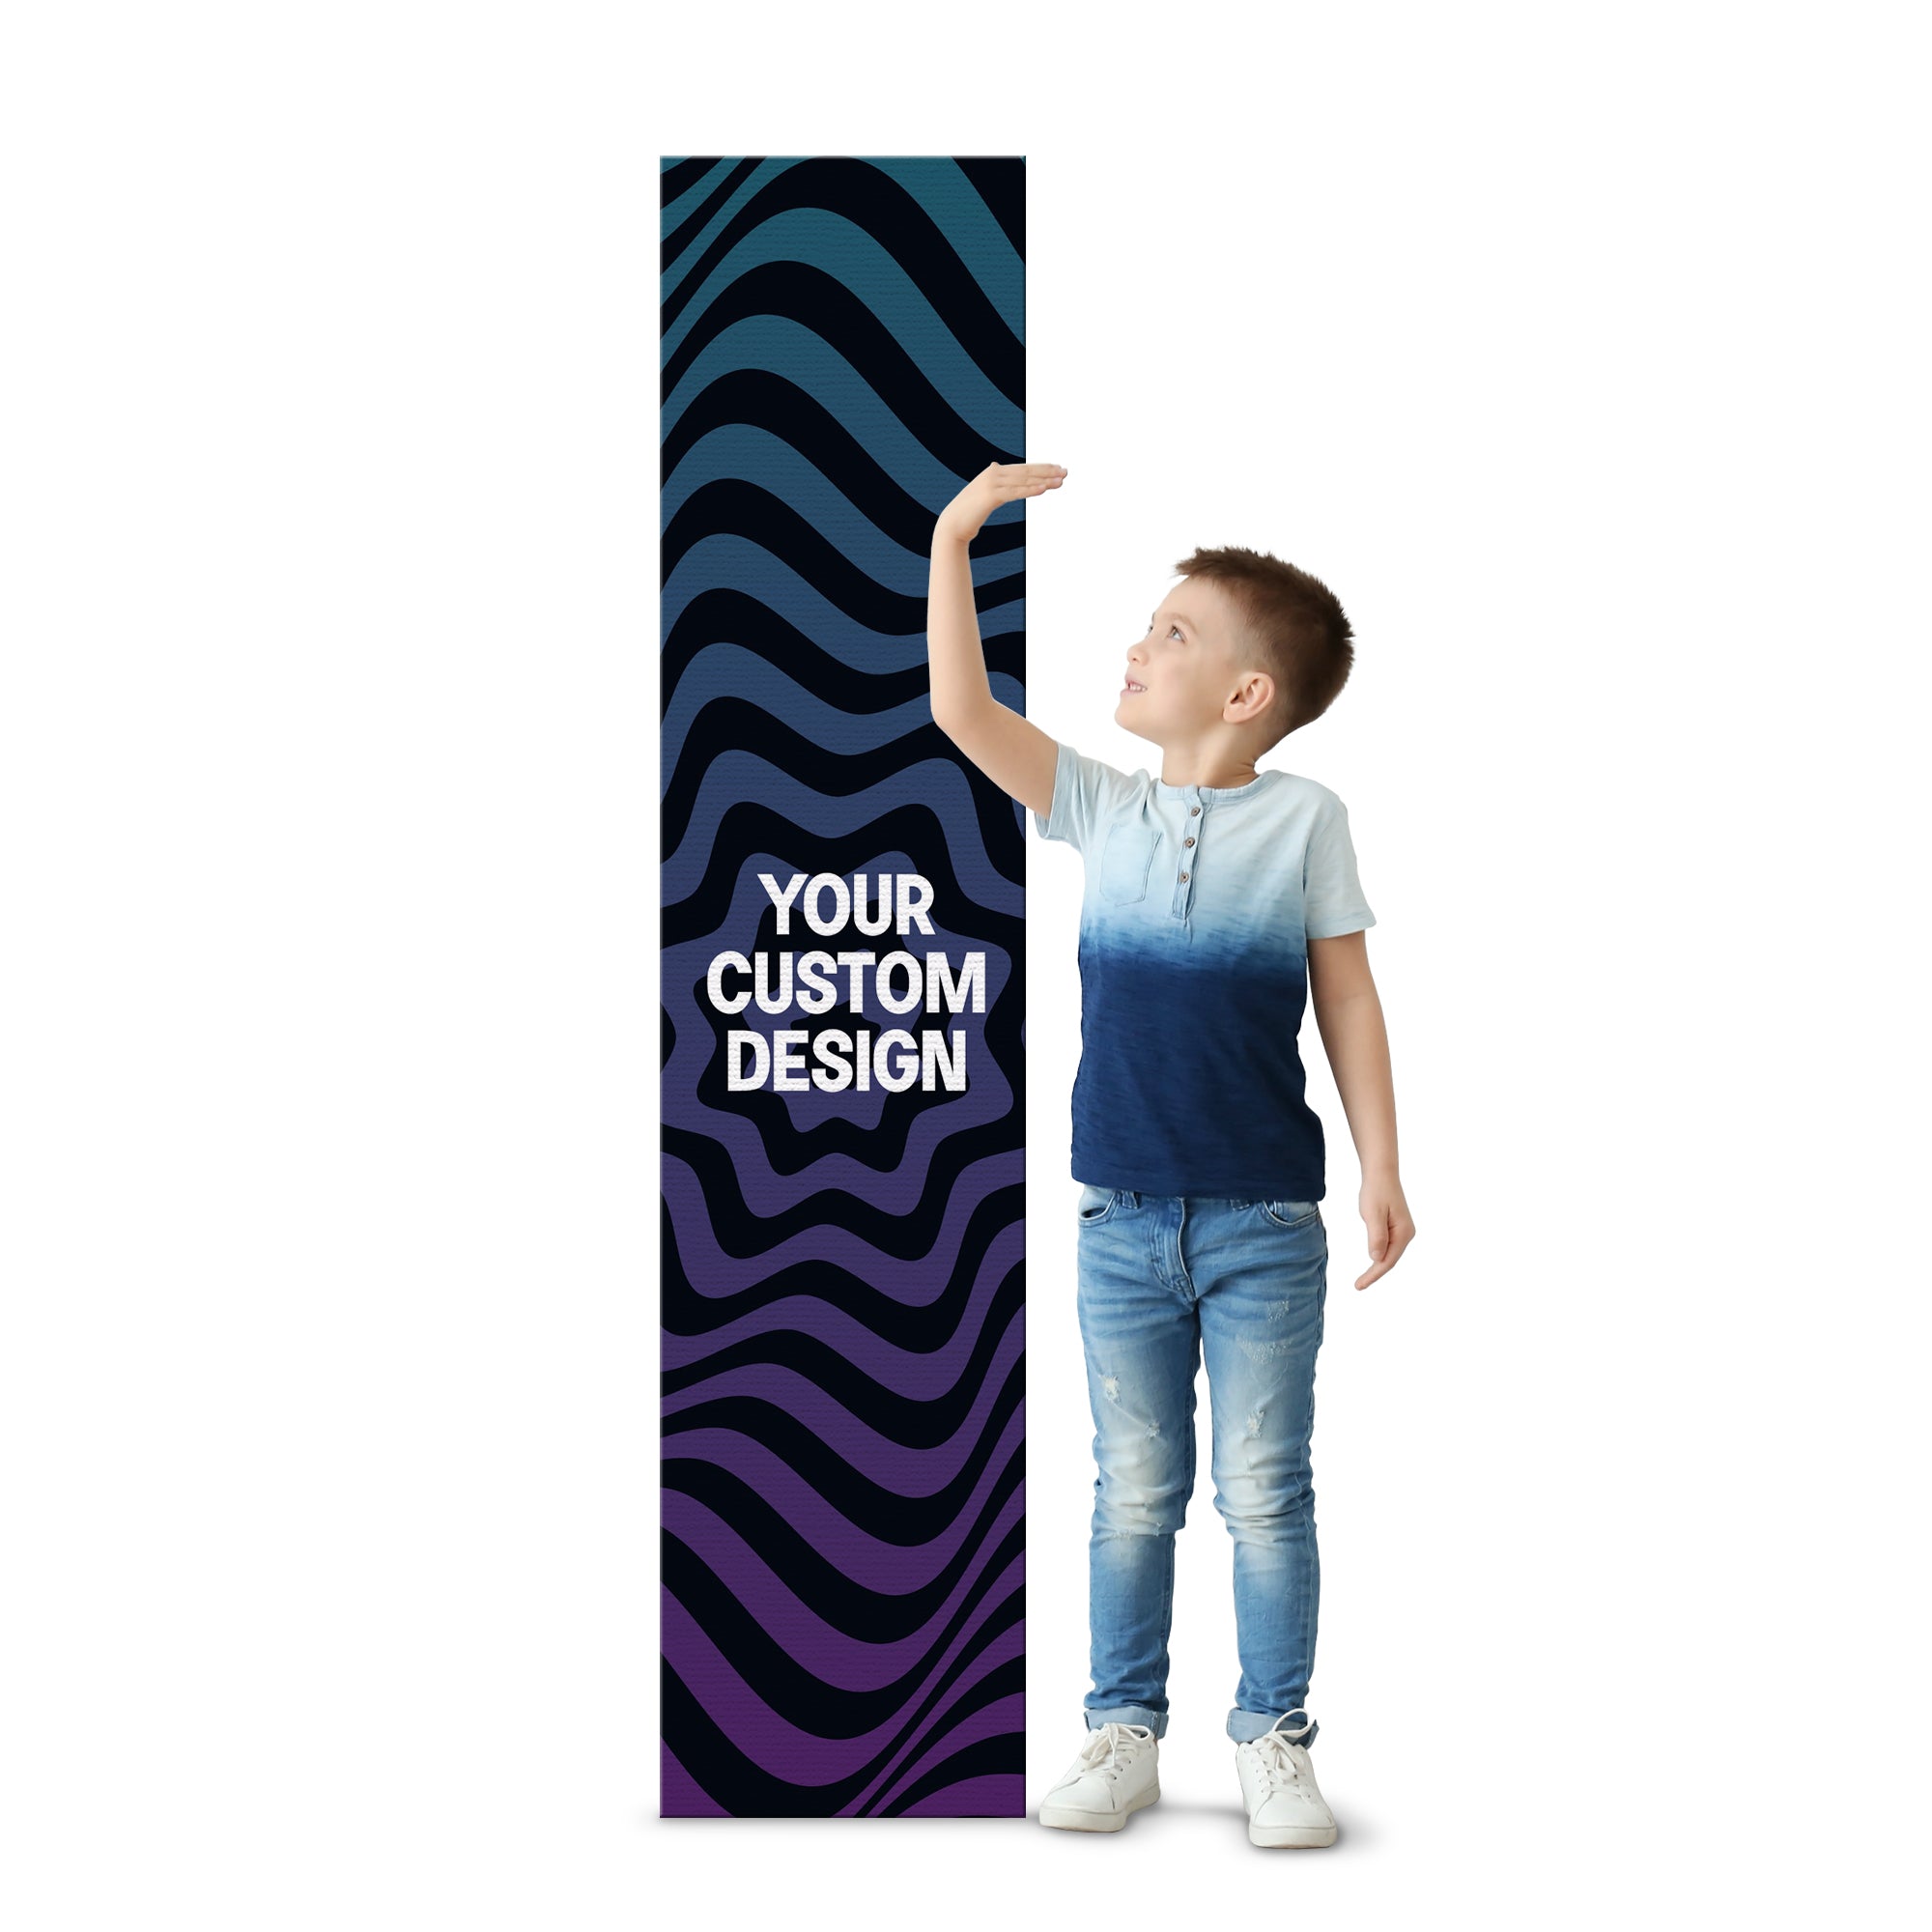 Growth Chart Teens - Make Your Own